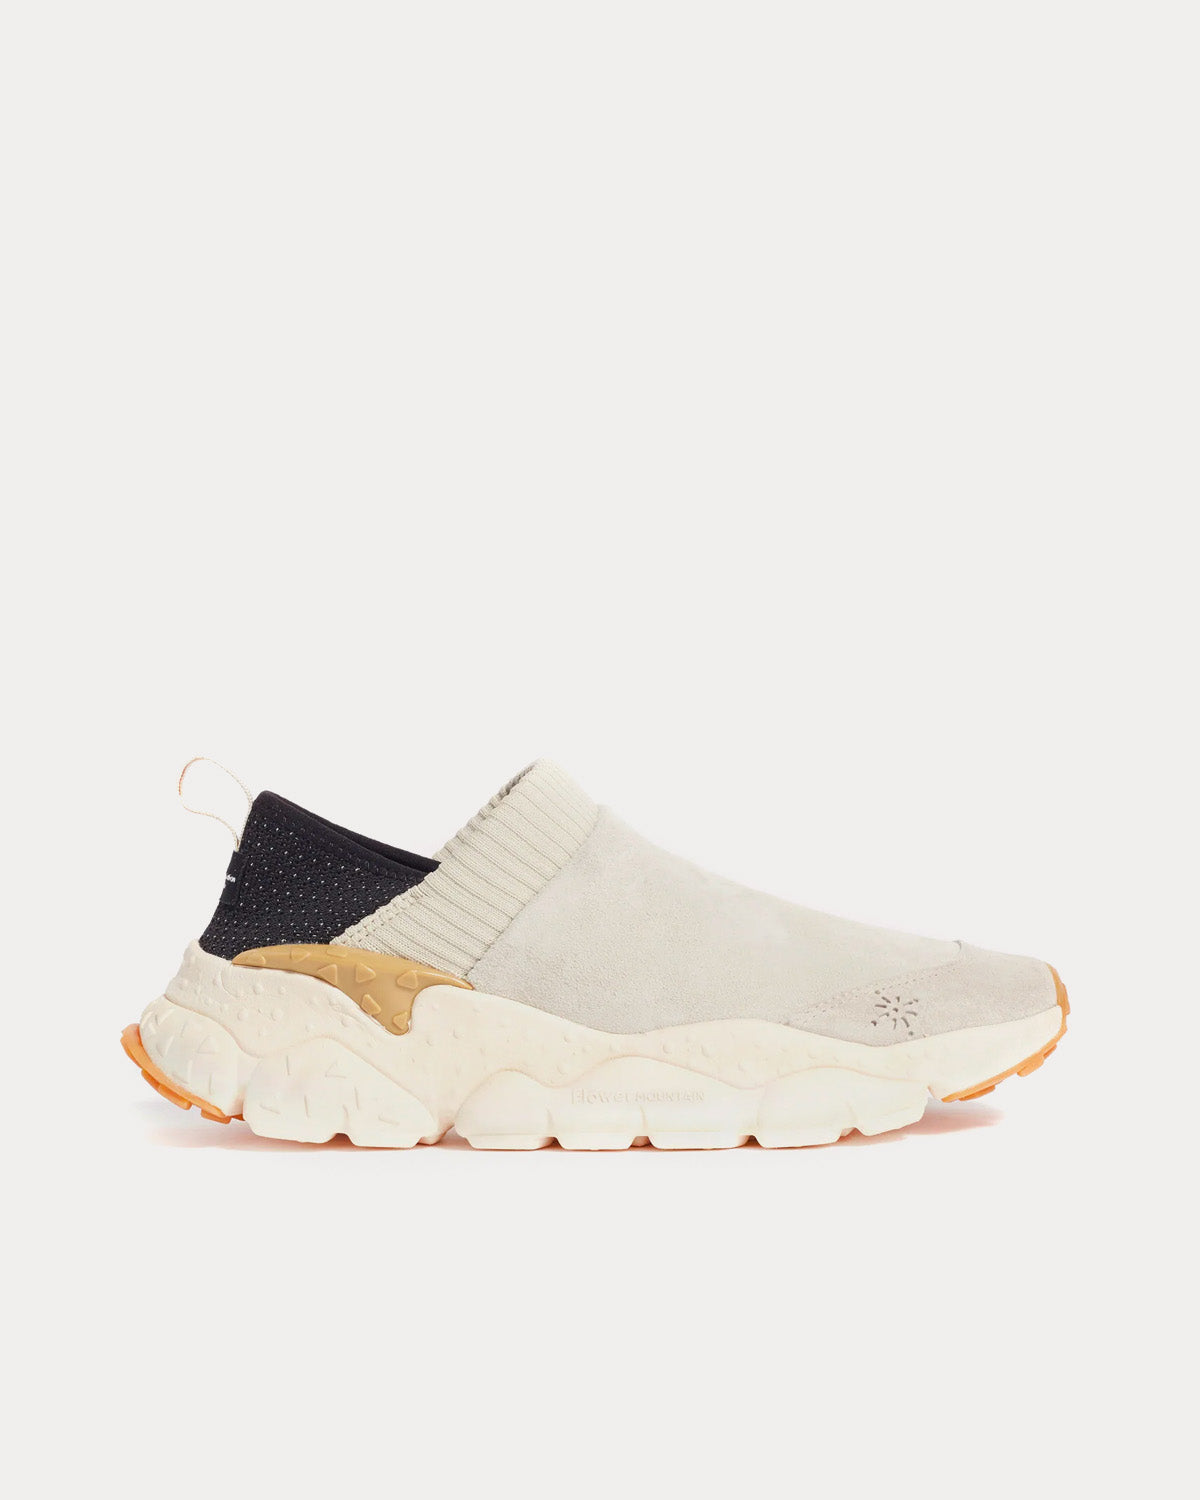 Flower Mountain x Universal Works - Camp Suede & Nylon Off-White Slip On Sneakers